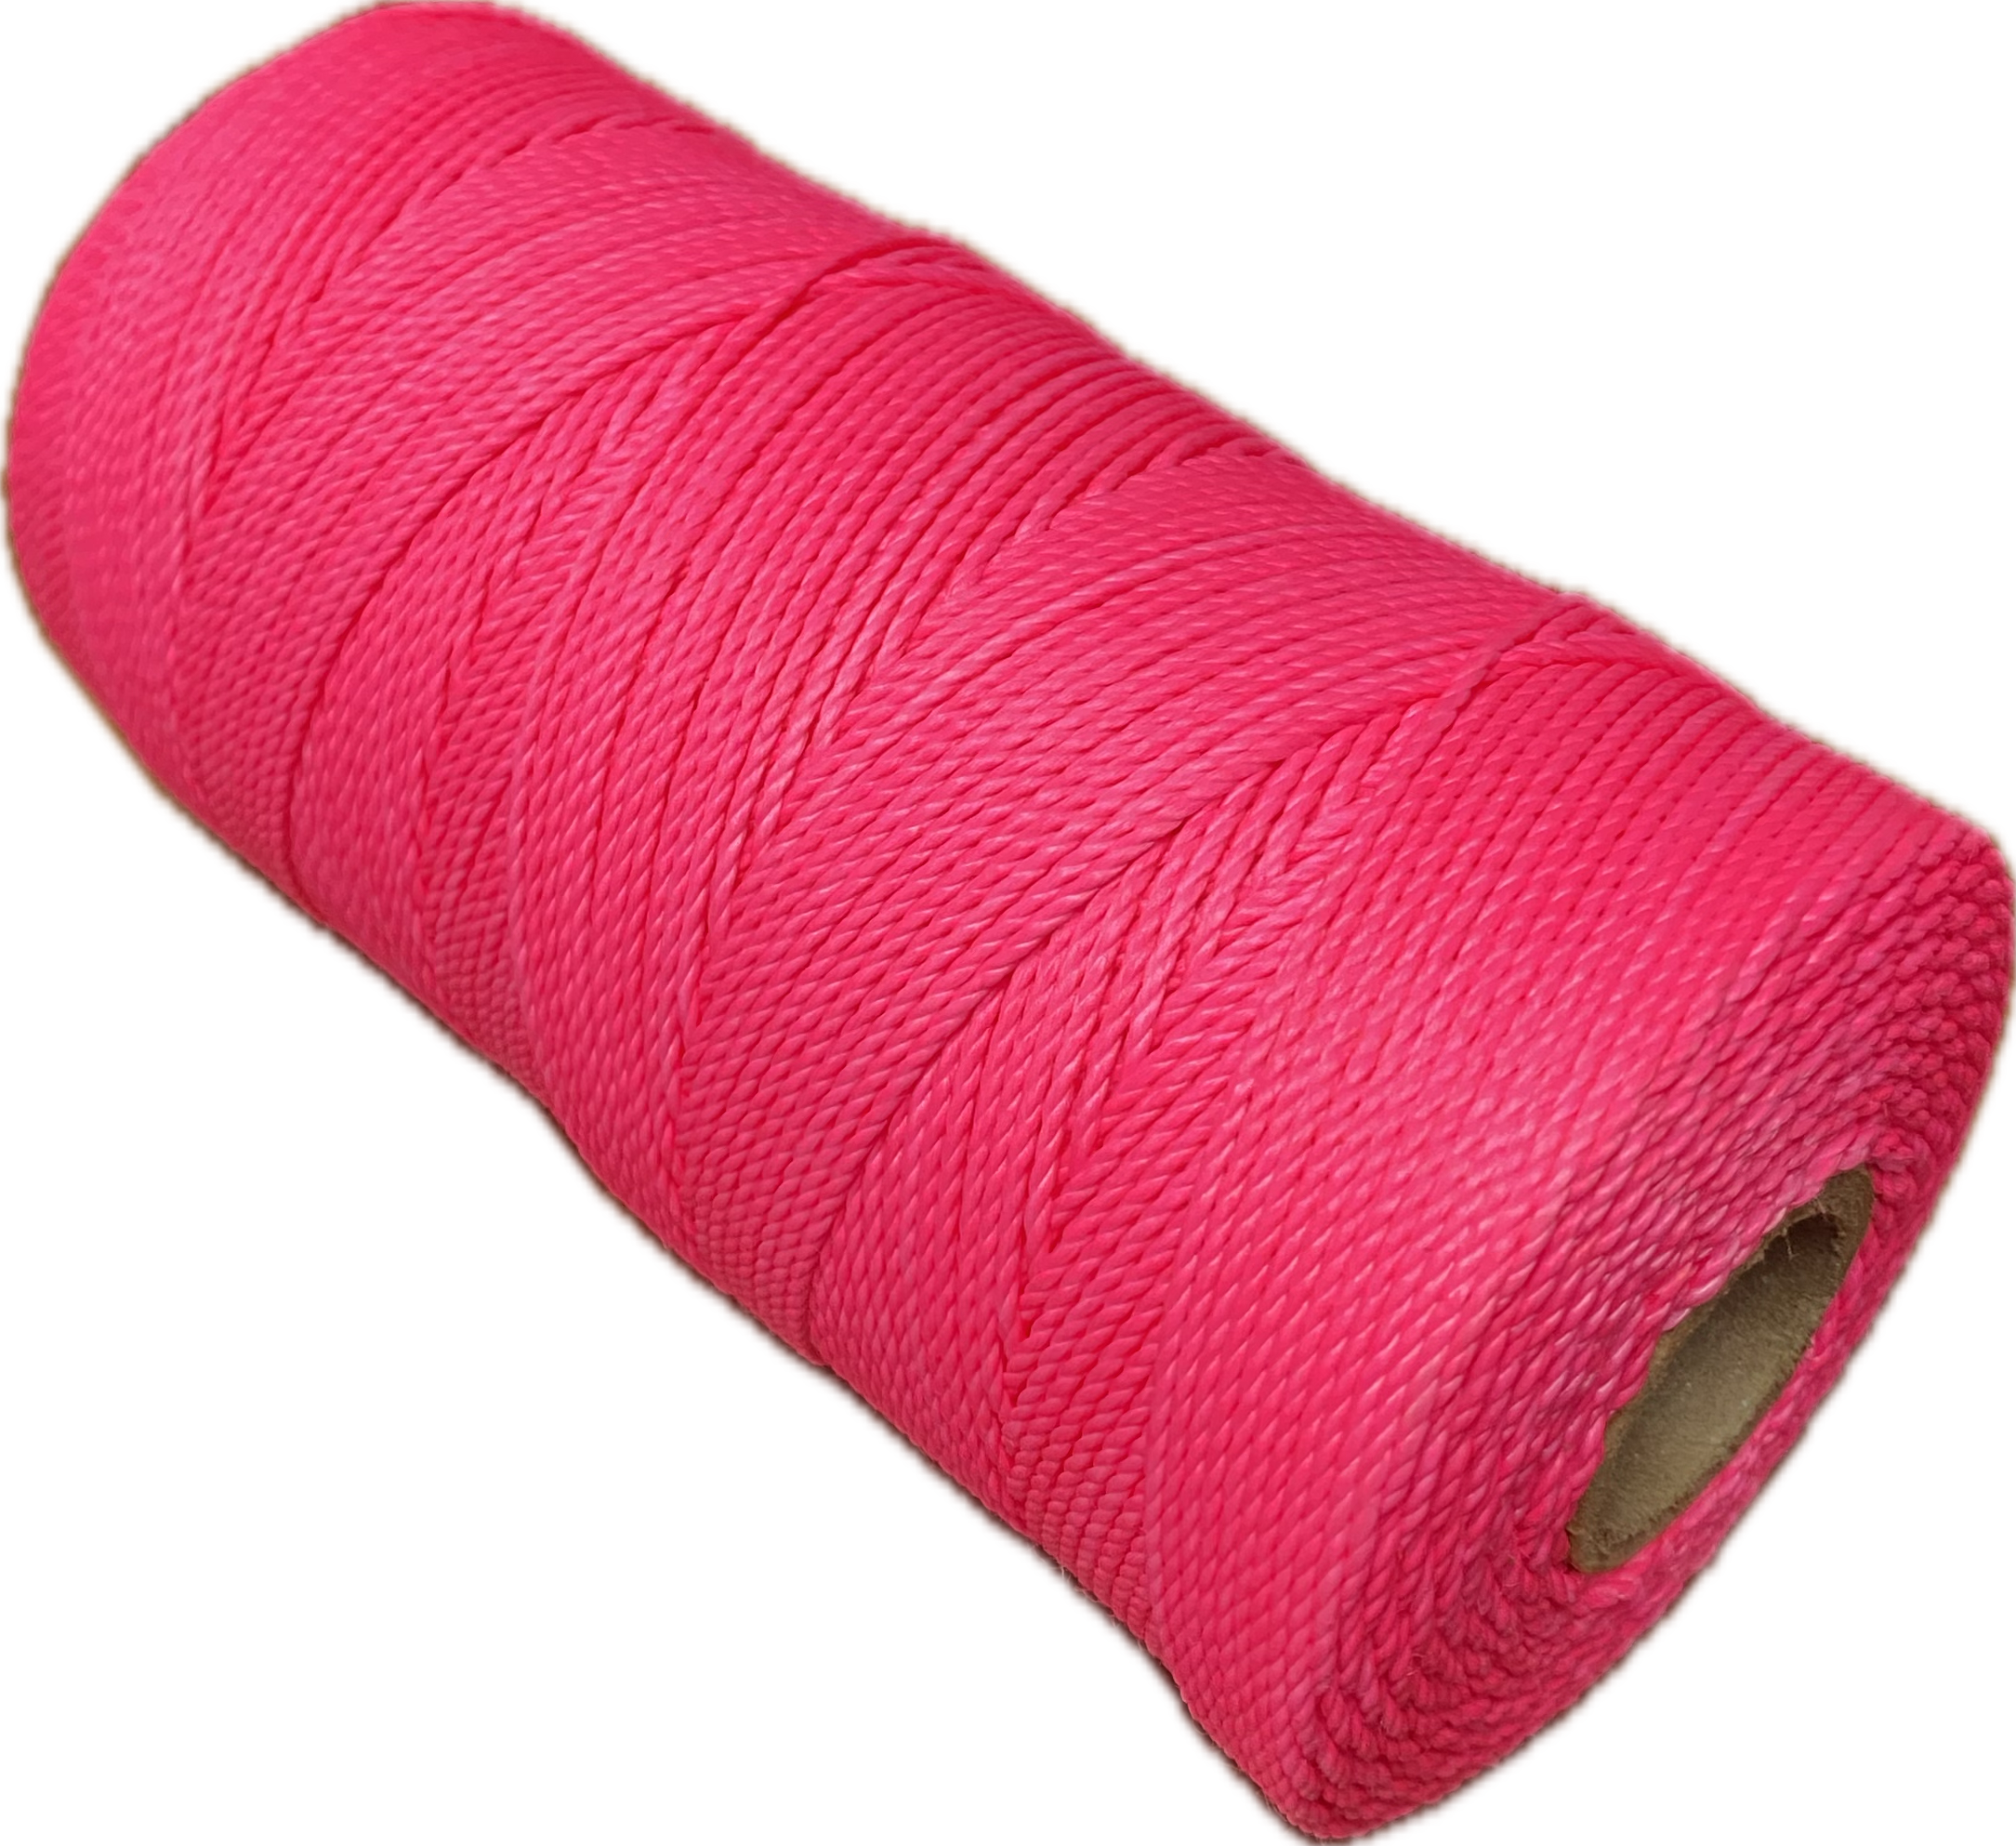 #18 x 1090ft Glo-Pink Twisted String Line